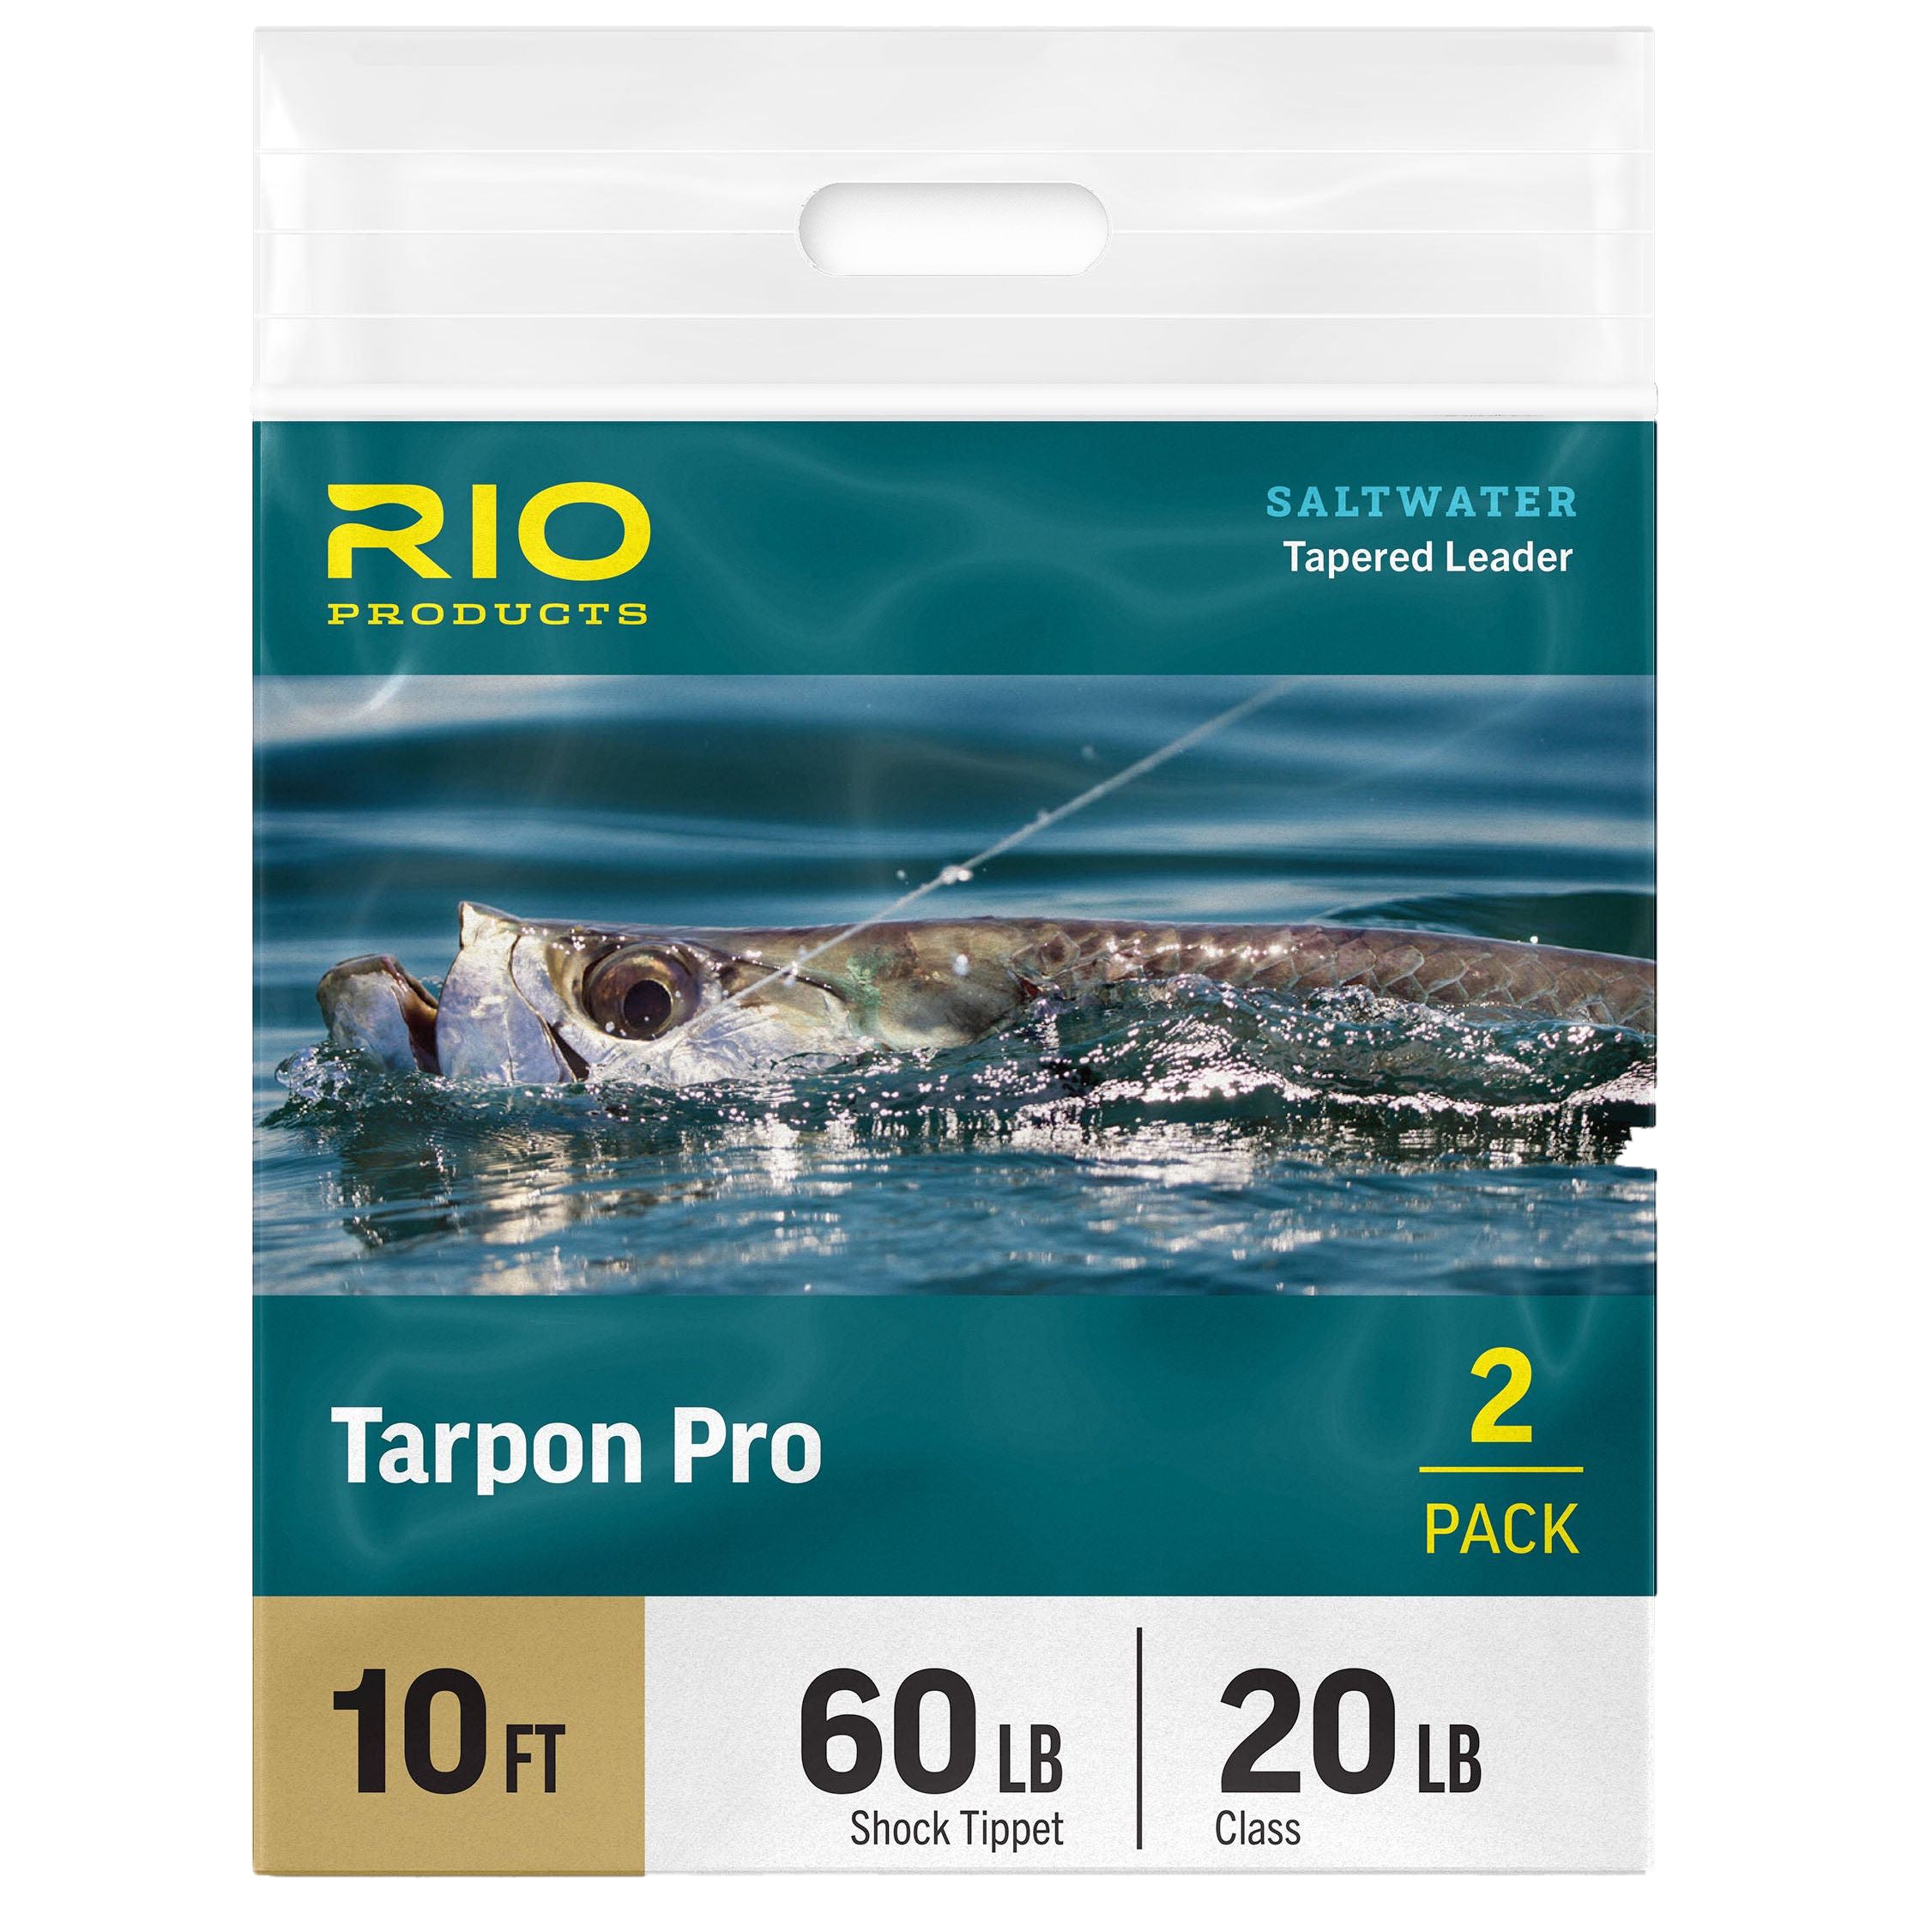 https://cdn.shopify.com/s/files/1/0639/6323/4516/products/221-rio-products-pro-tarpon-leaders-01.jpg?v=1679588192